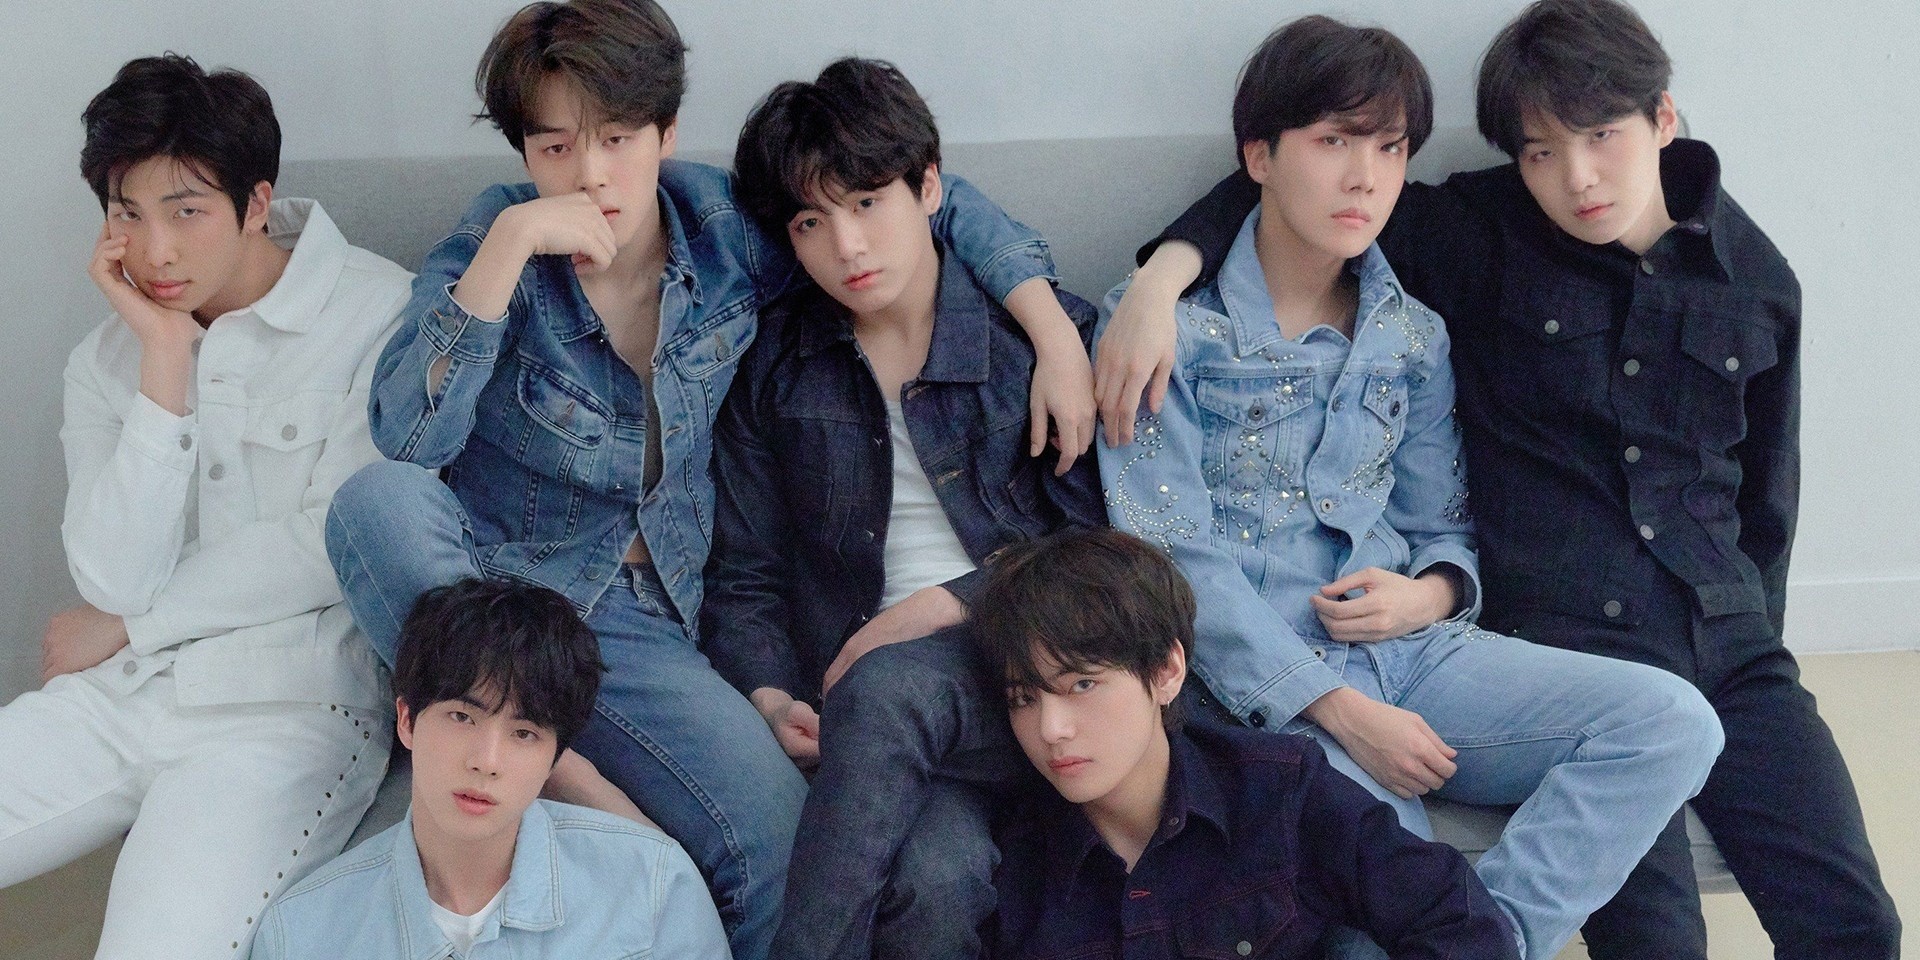 BTS drop music video for 'FAKE LOVE' off new album LOVE YOURSELF 轉 'Tear'– watch